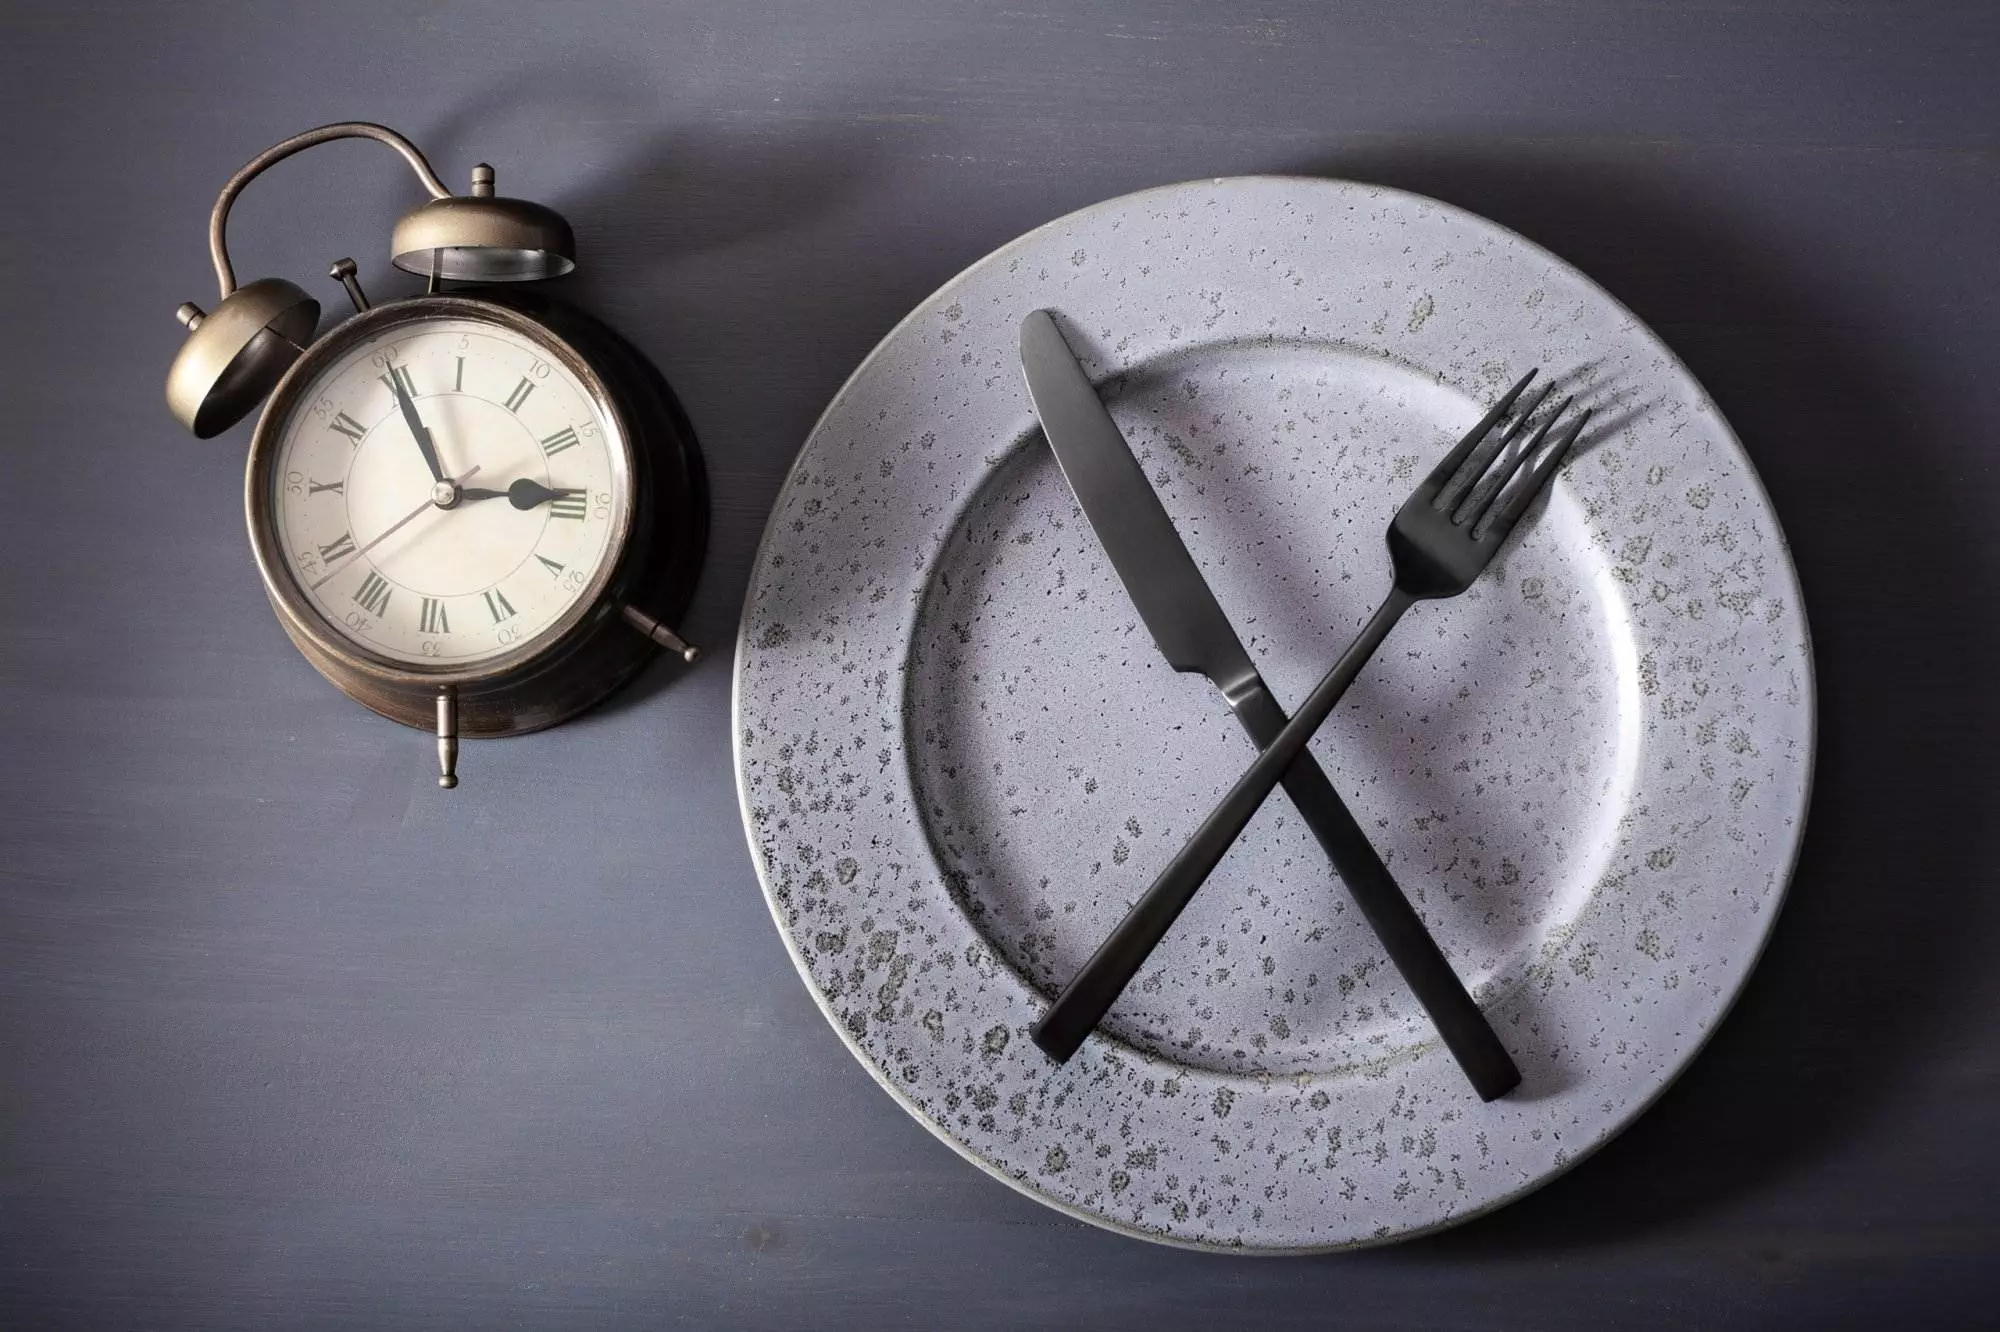 concept of intermittent fasting, ketogenic diet, weight loss. fork and knife crossed on a plate and alarm clock